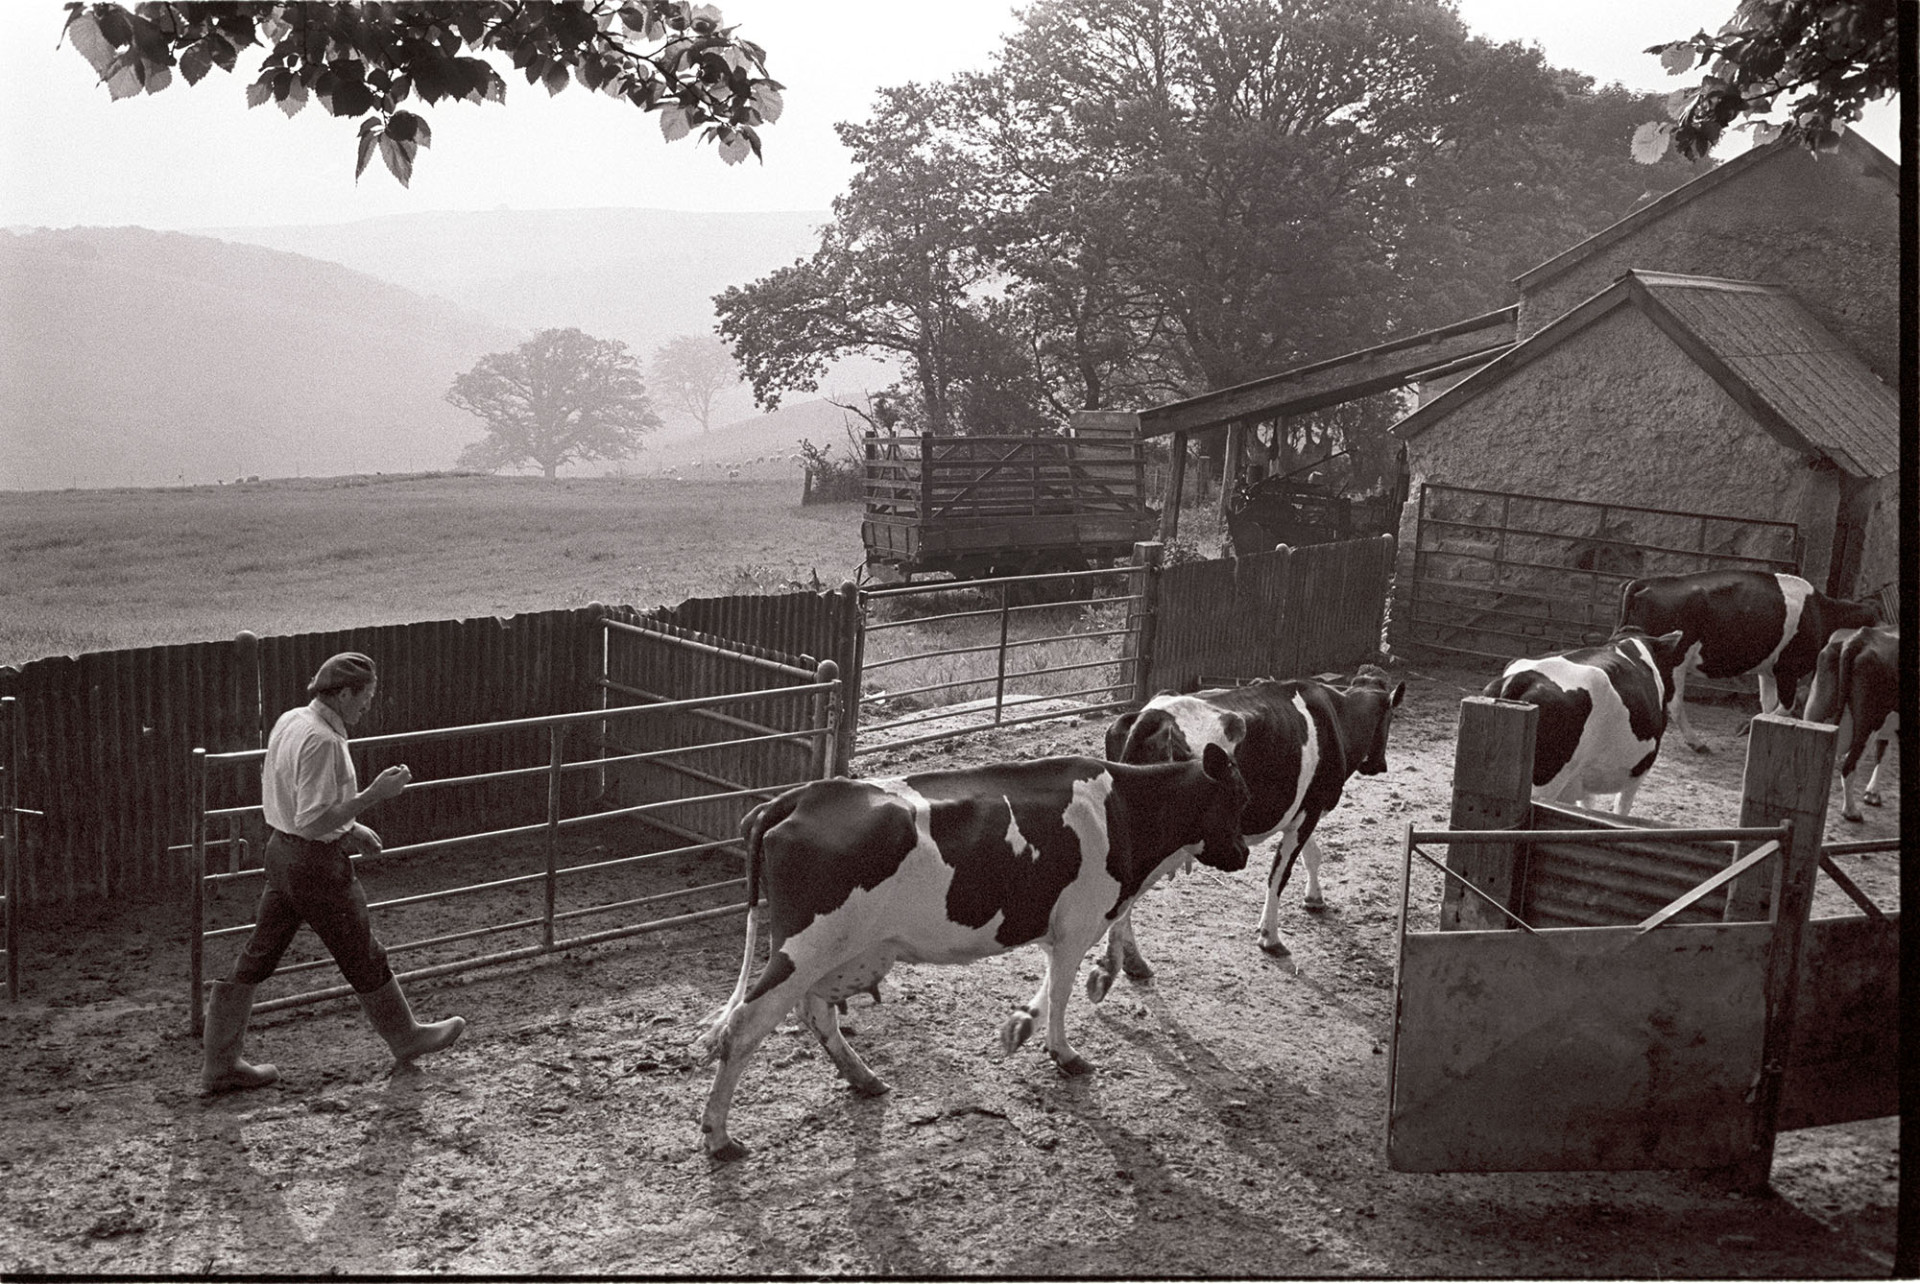 Farmer bringing cows in to be milked across farmyard. 
[A man herding cows through a farmyard to be milked at Densham, Ashreigney. Barns, fields and a trailer are visible in the background.]